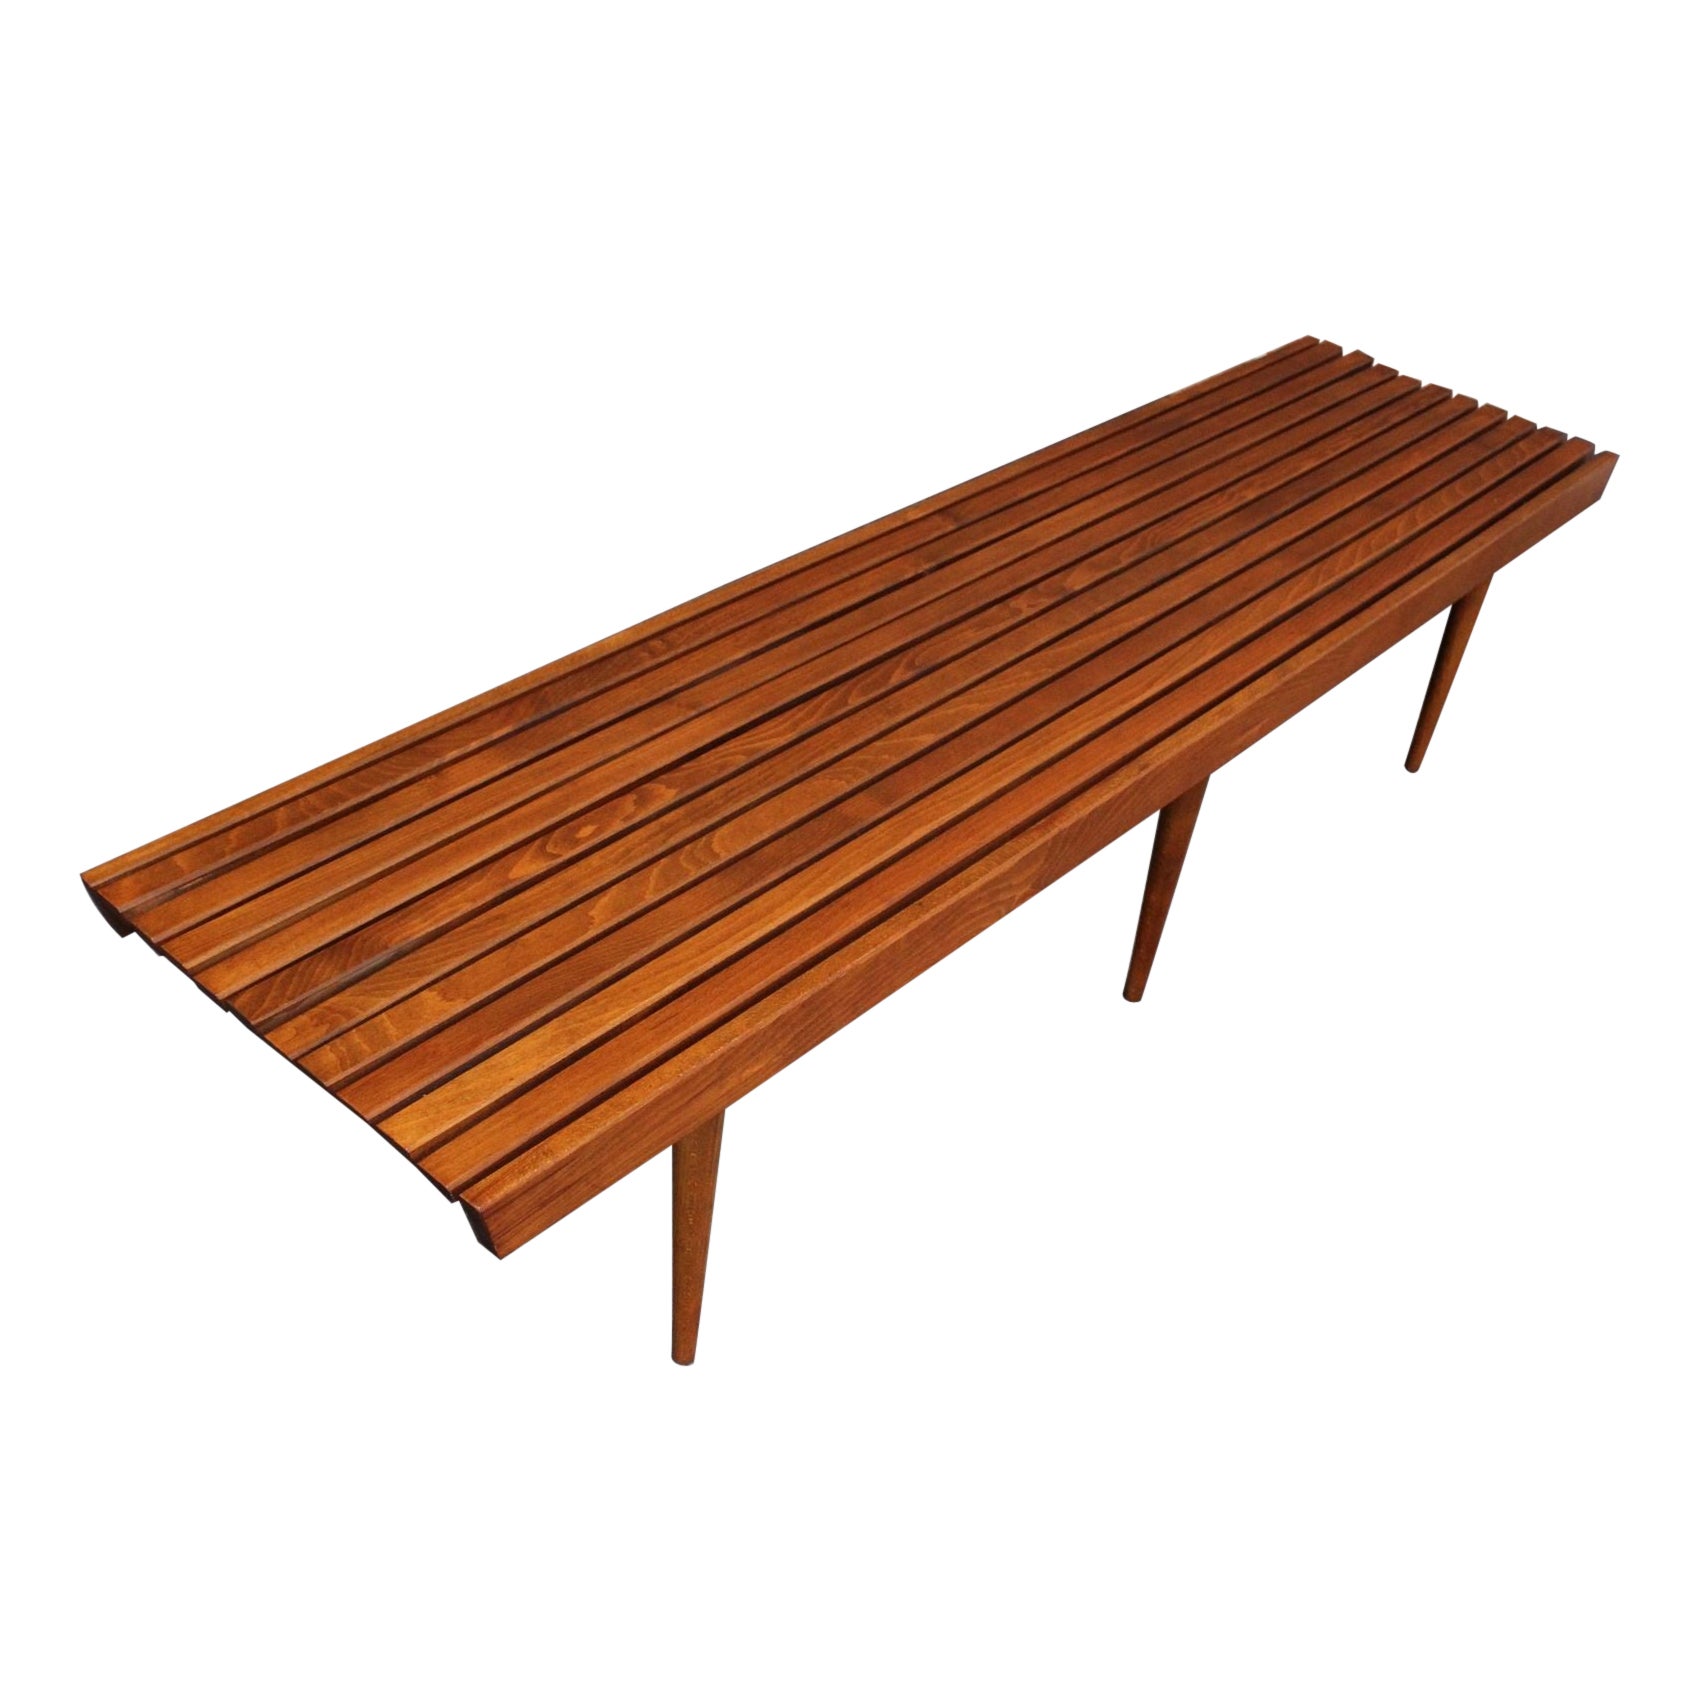 Long Mid-Century Modern Walnut Slatted Bench / Coffee Table with Tapered Legs For Sale